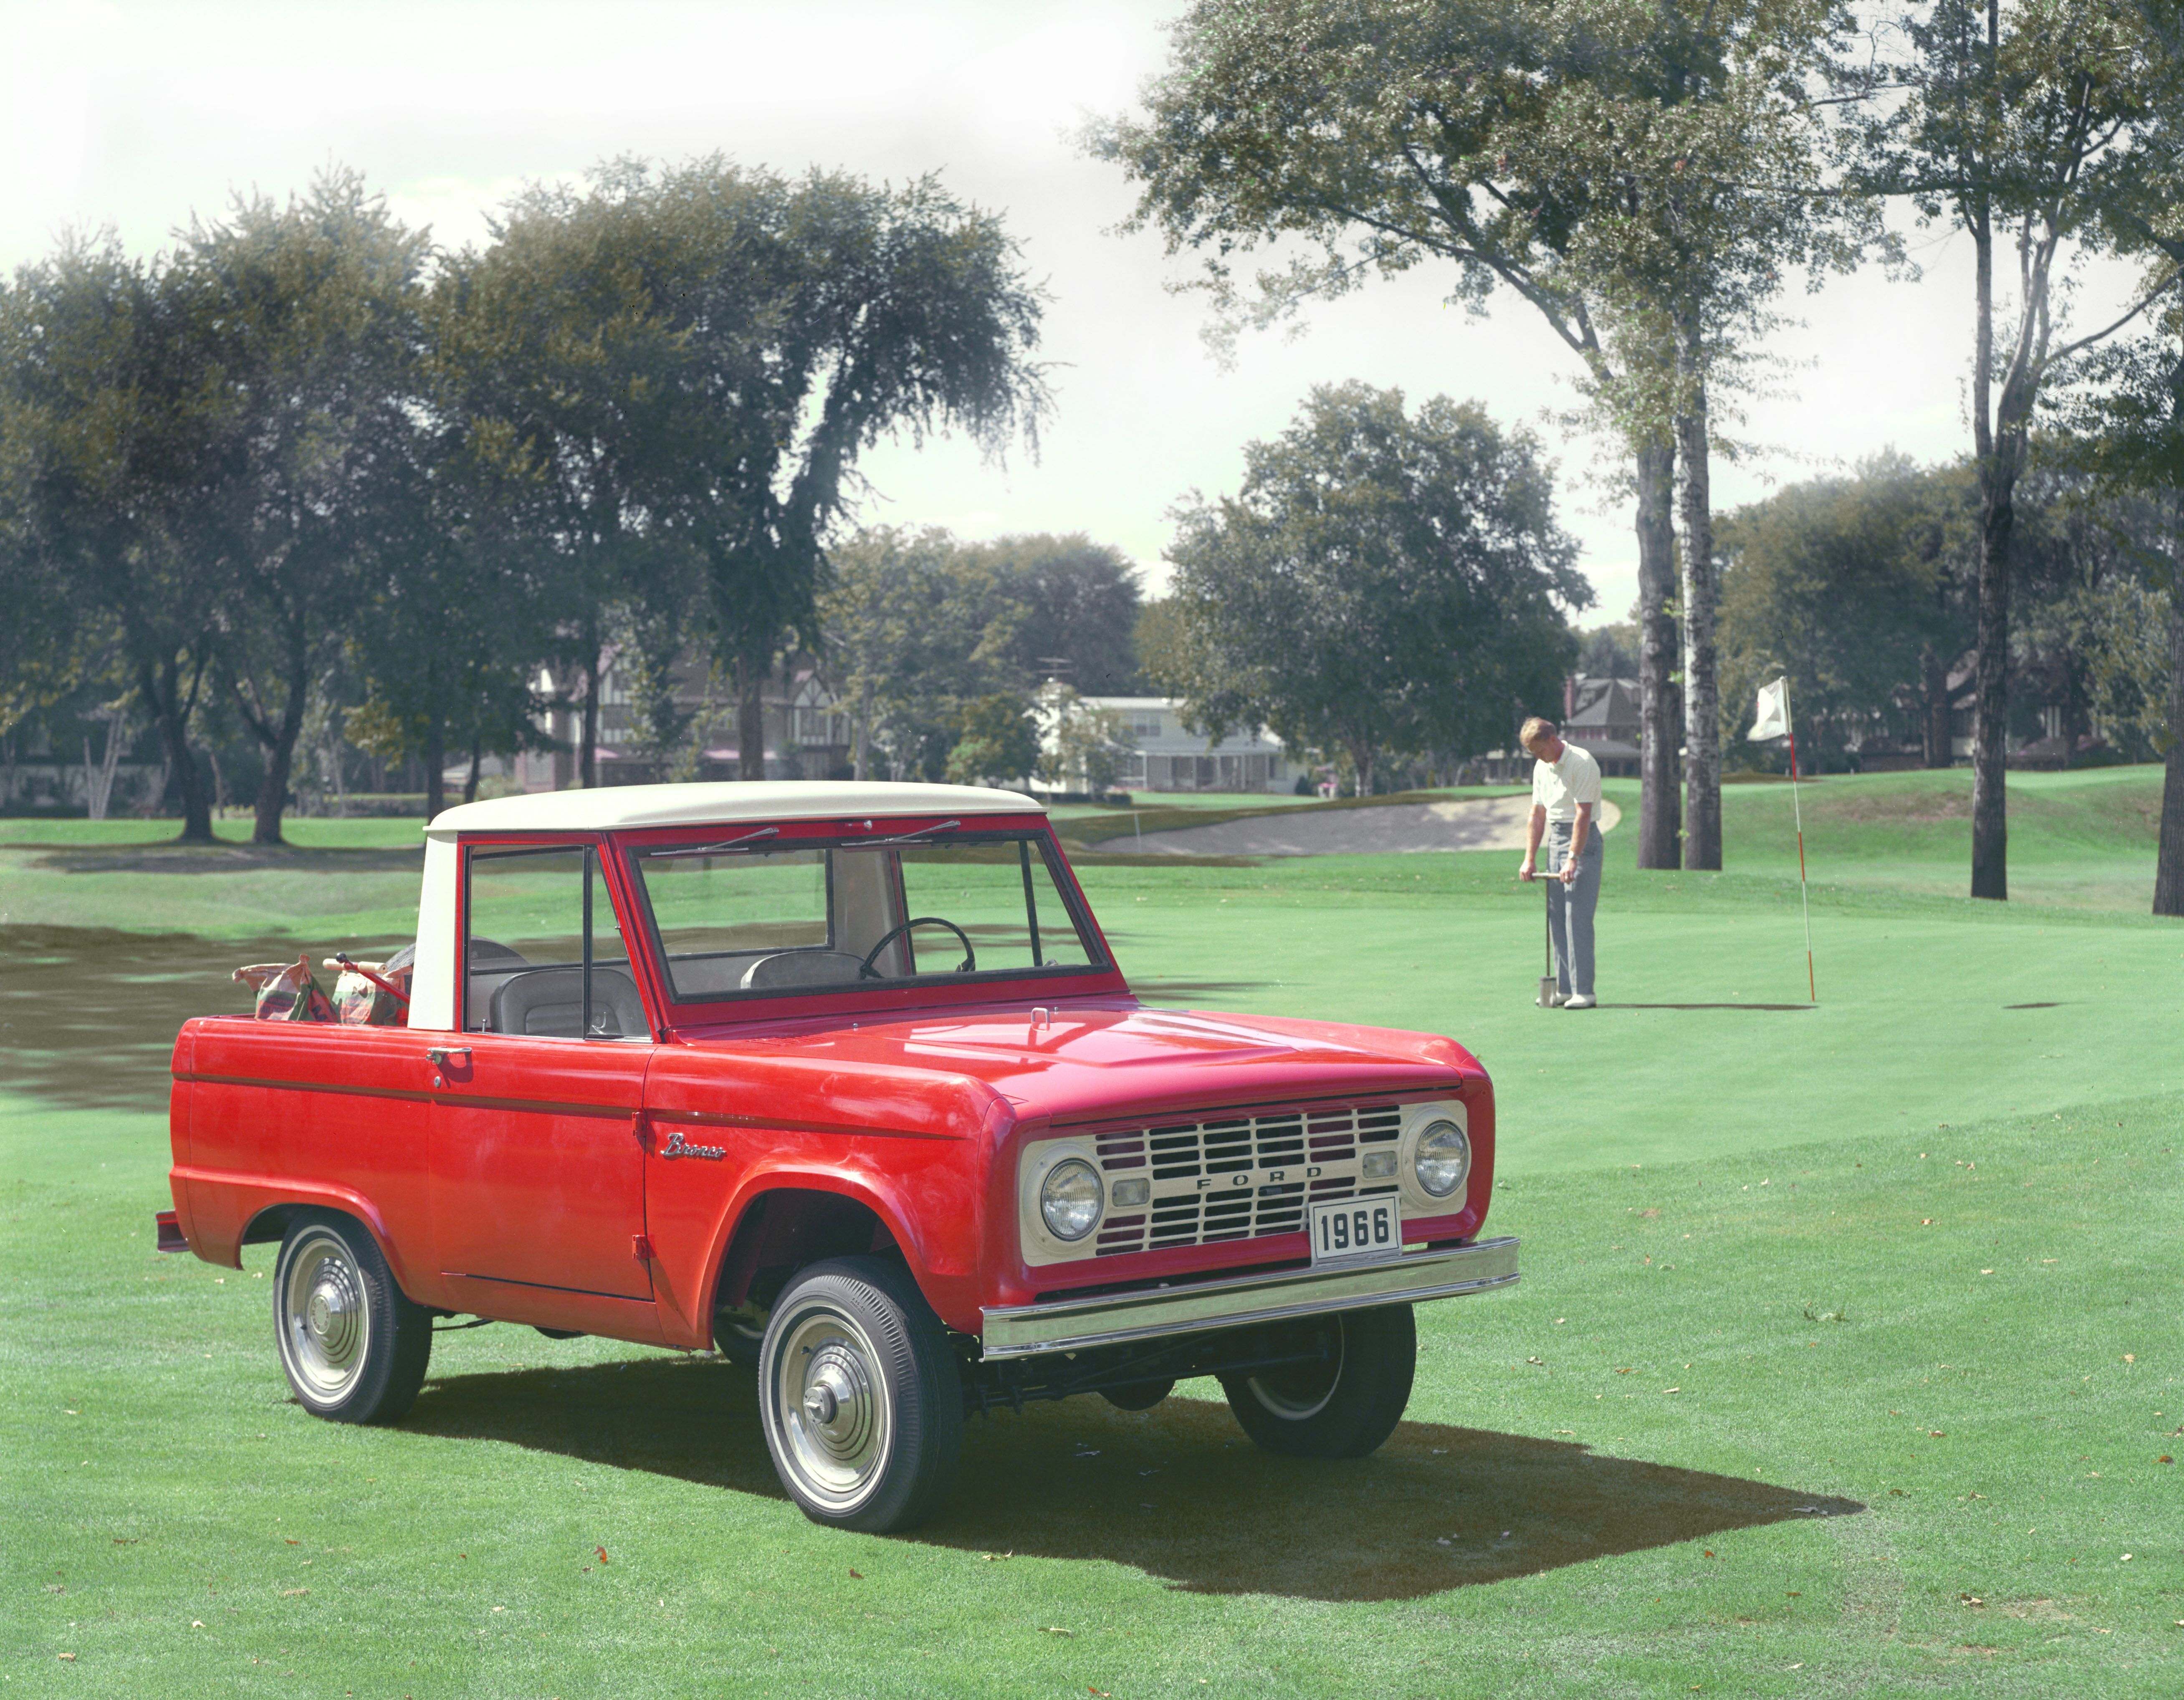 20 Awesome Old School 4x4s Vintage Suvs And Their Histories